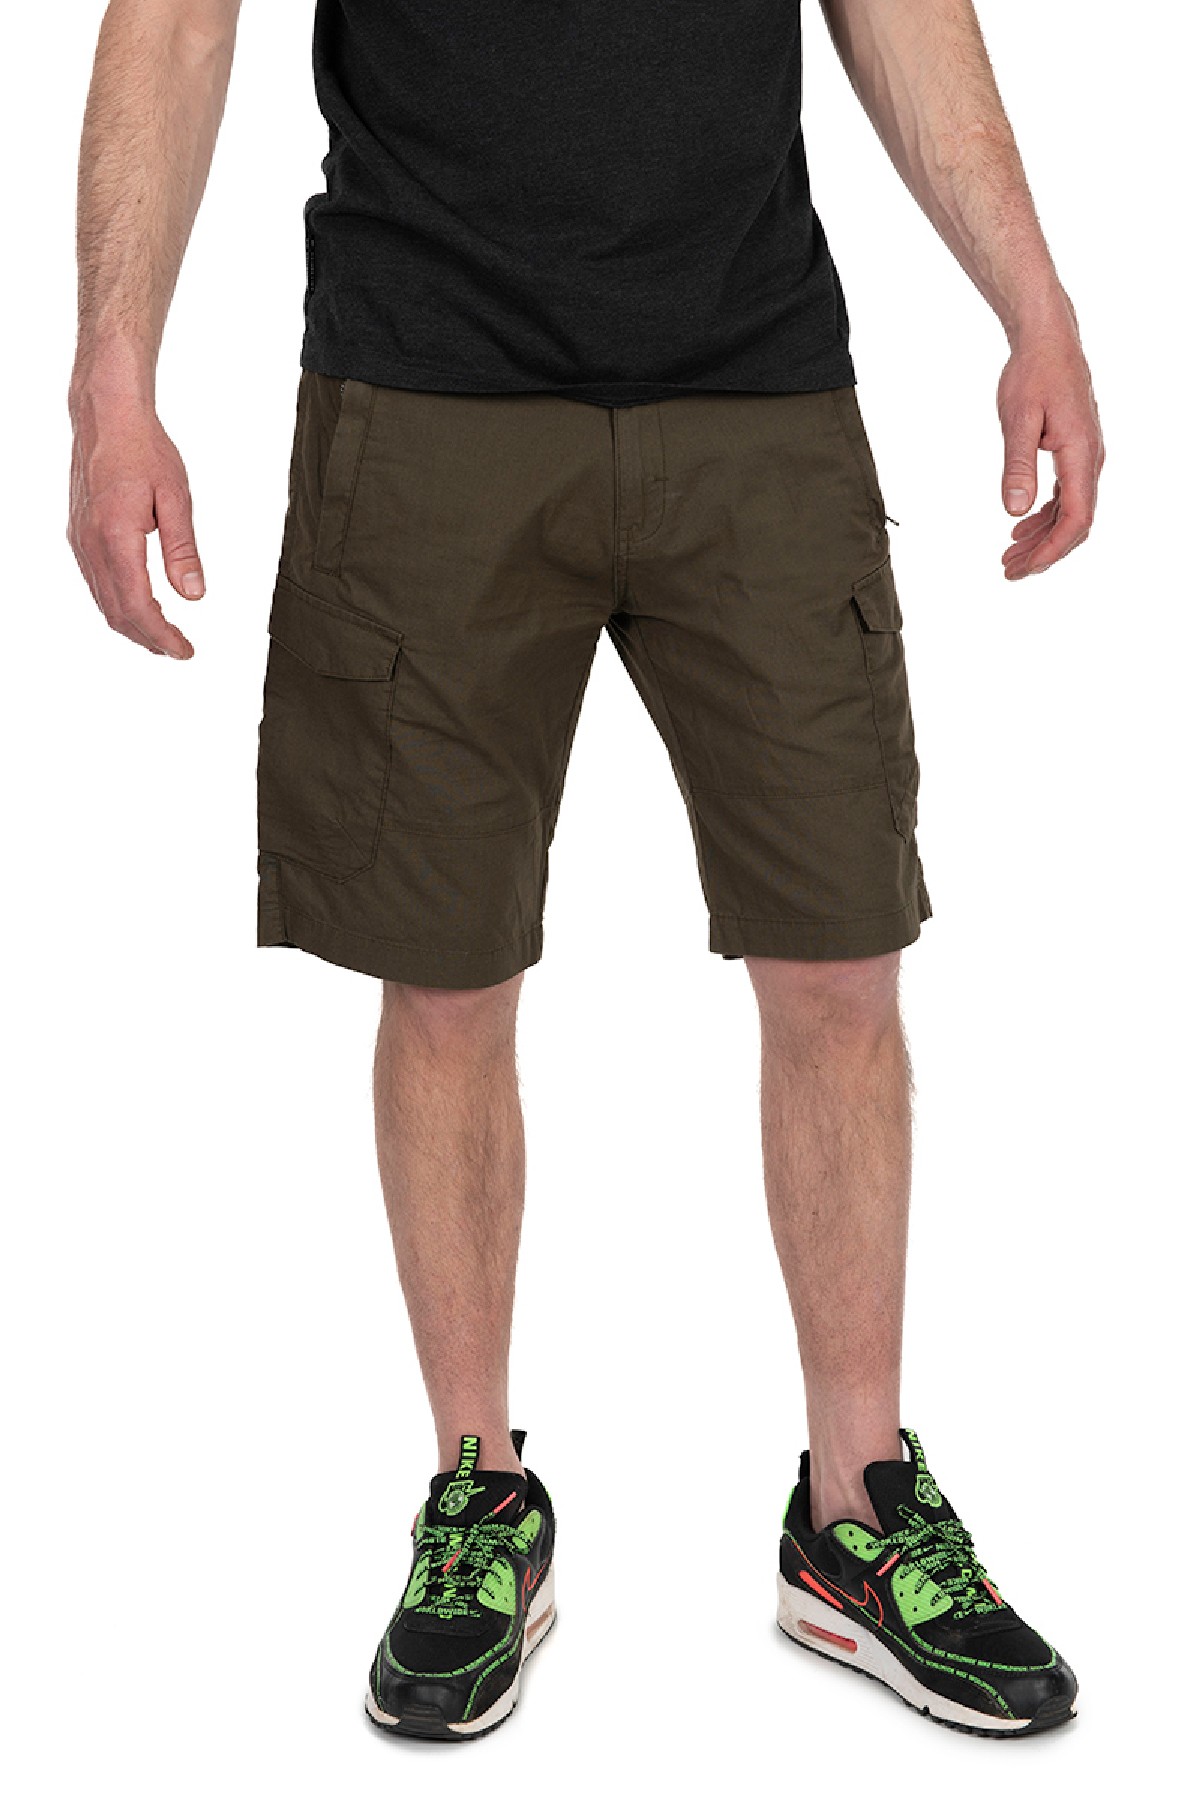 Fox Collection Lightweight Cargo Shorts Green & Black Large